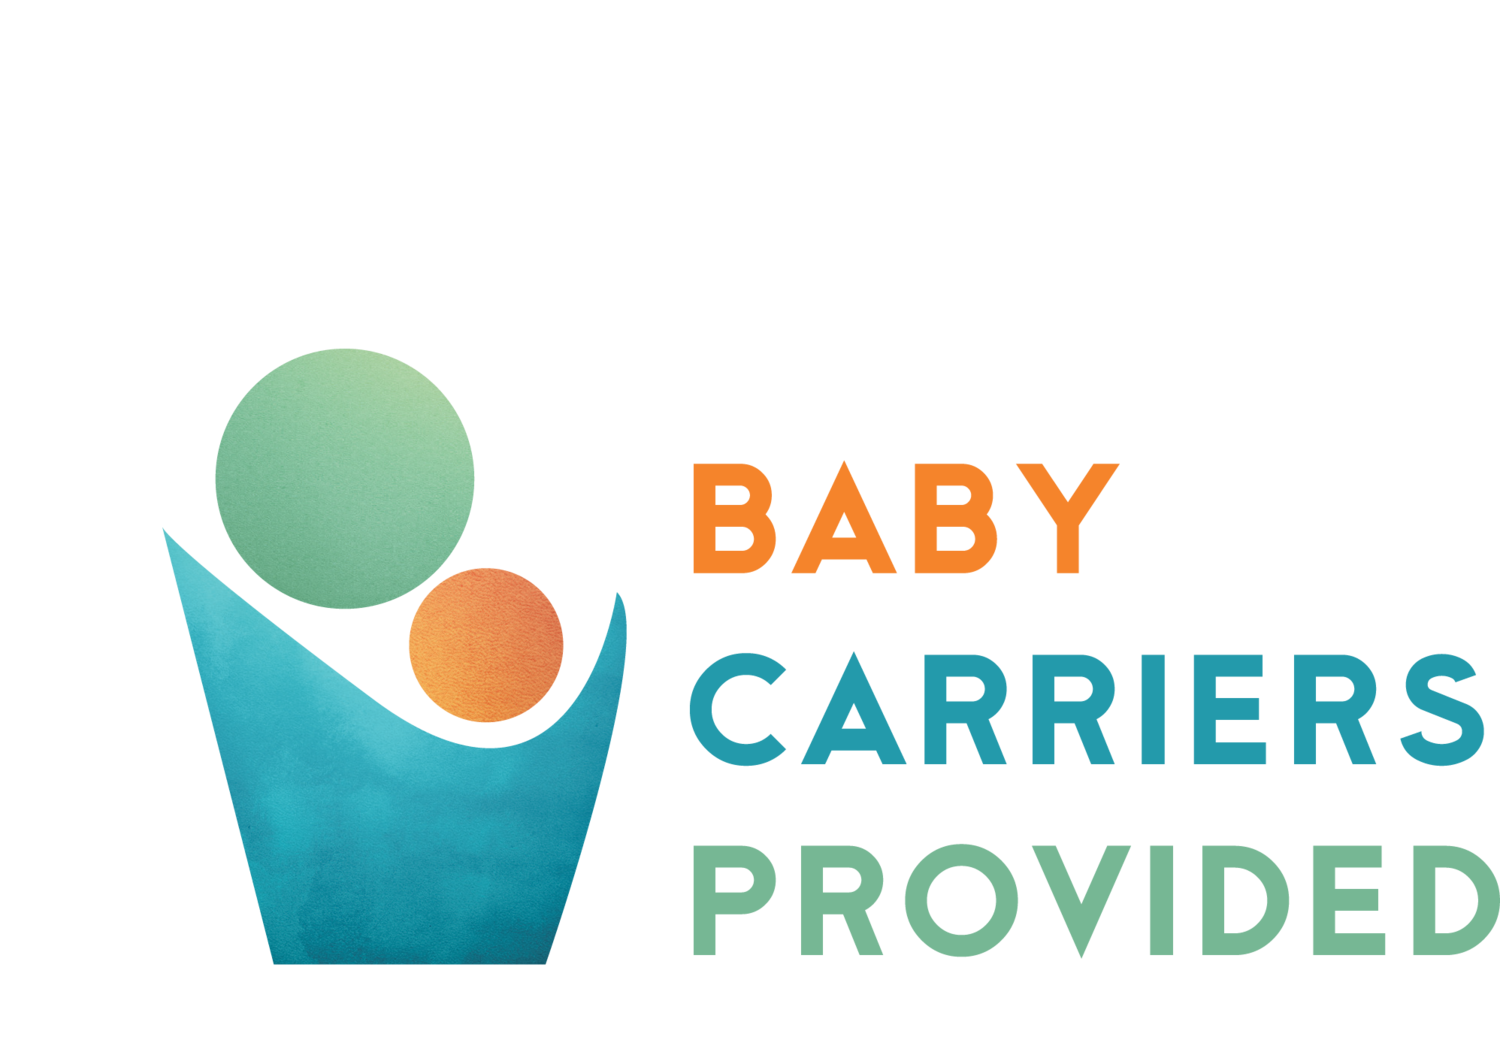 Baby Carriers Provided